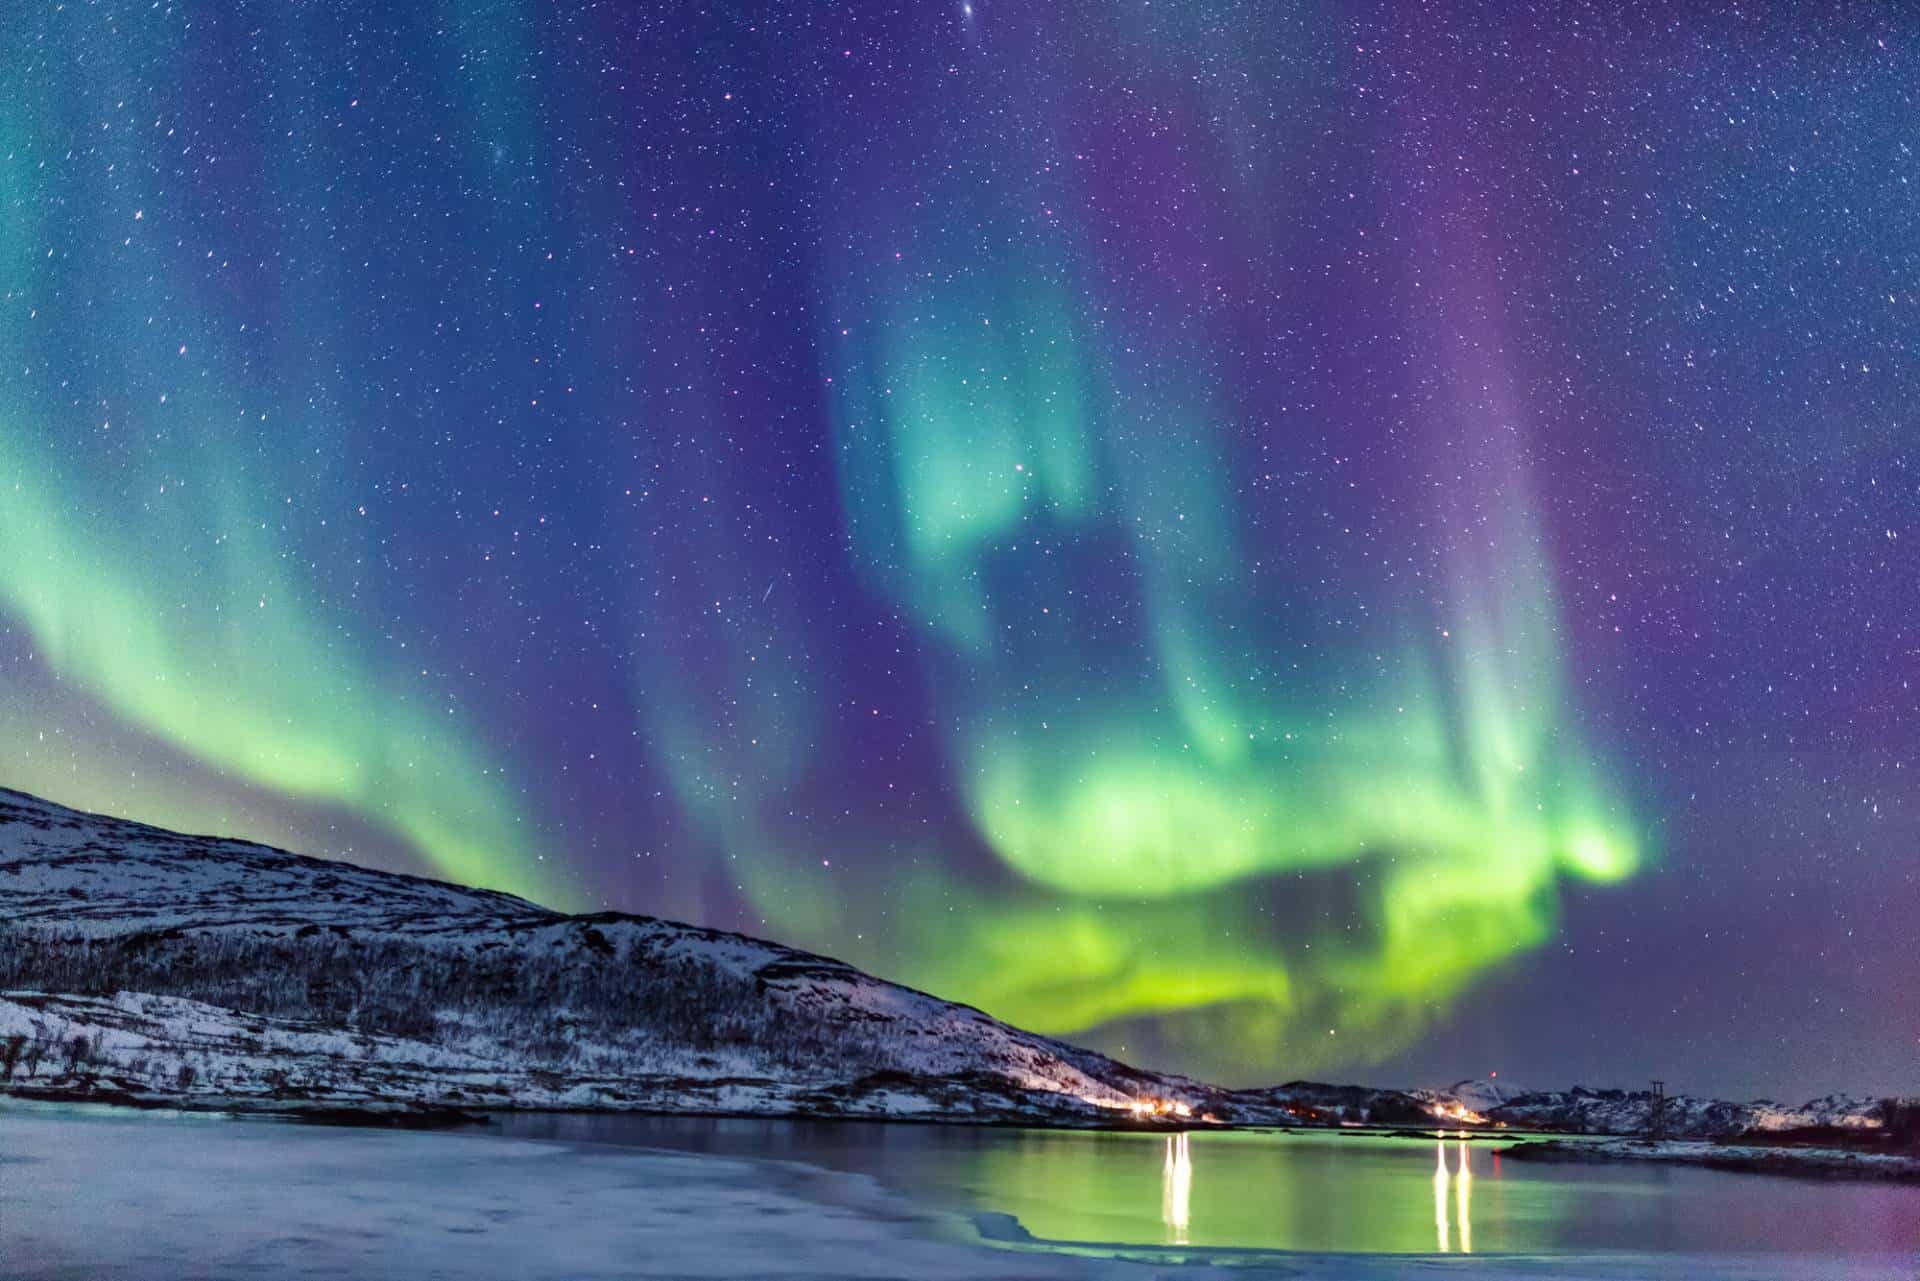 Where is the best place to see the northern lights?